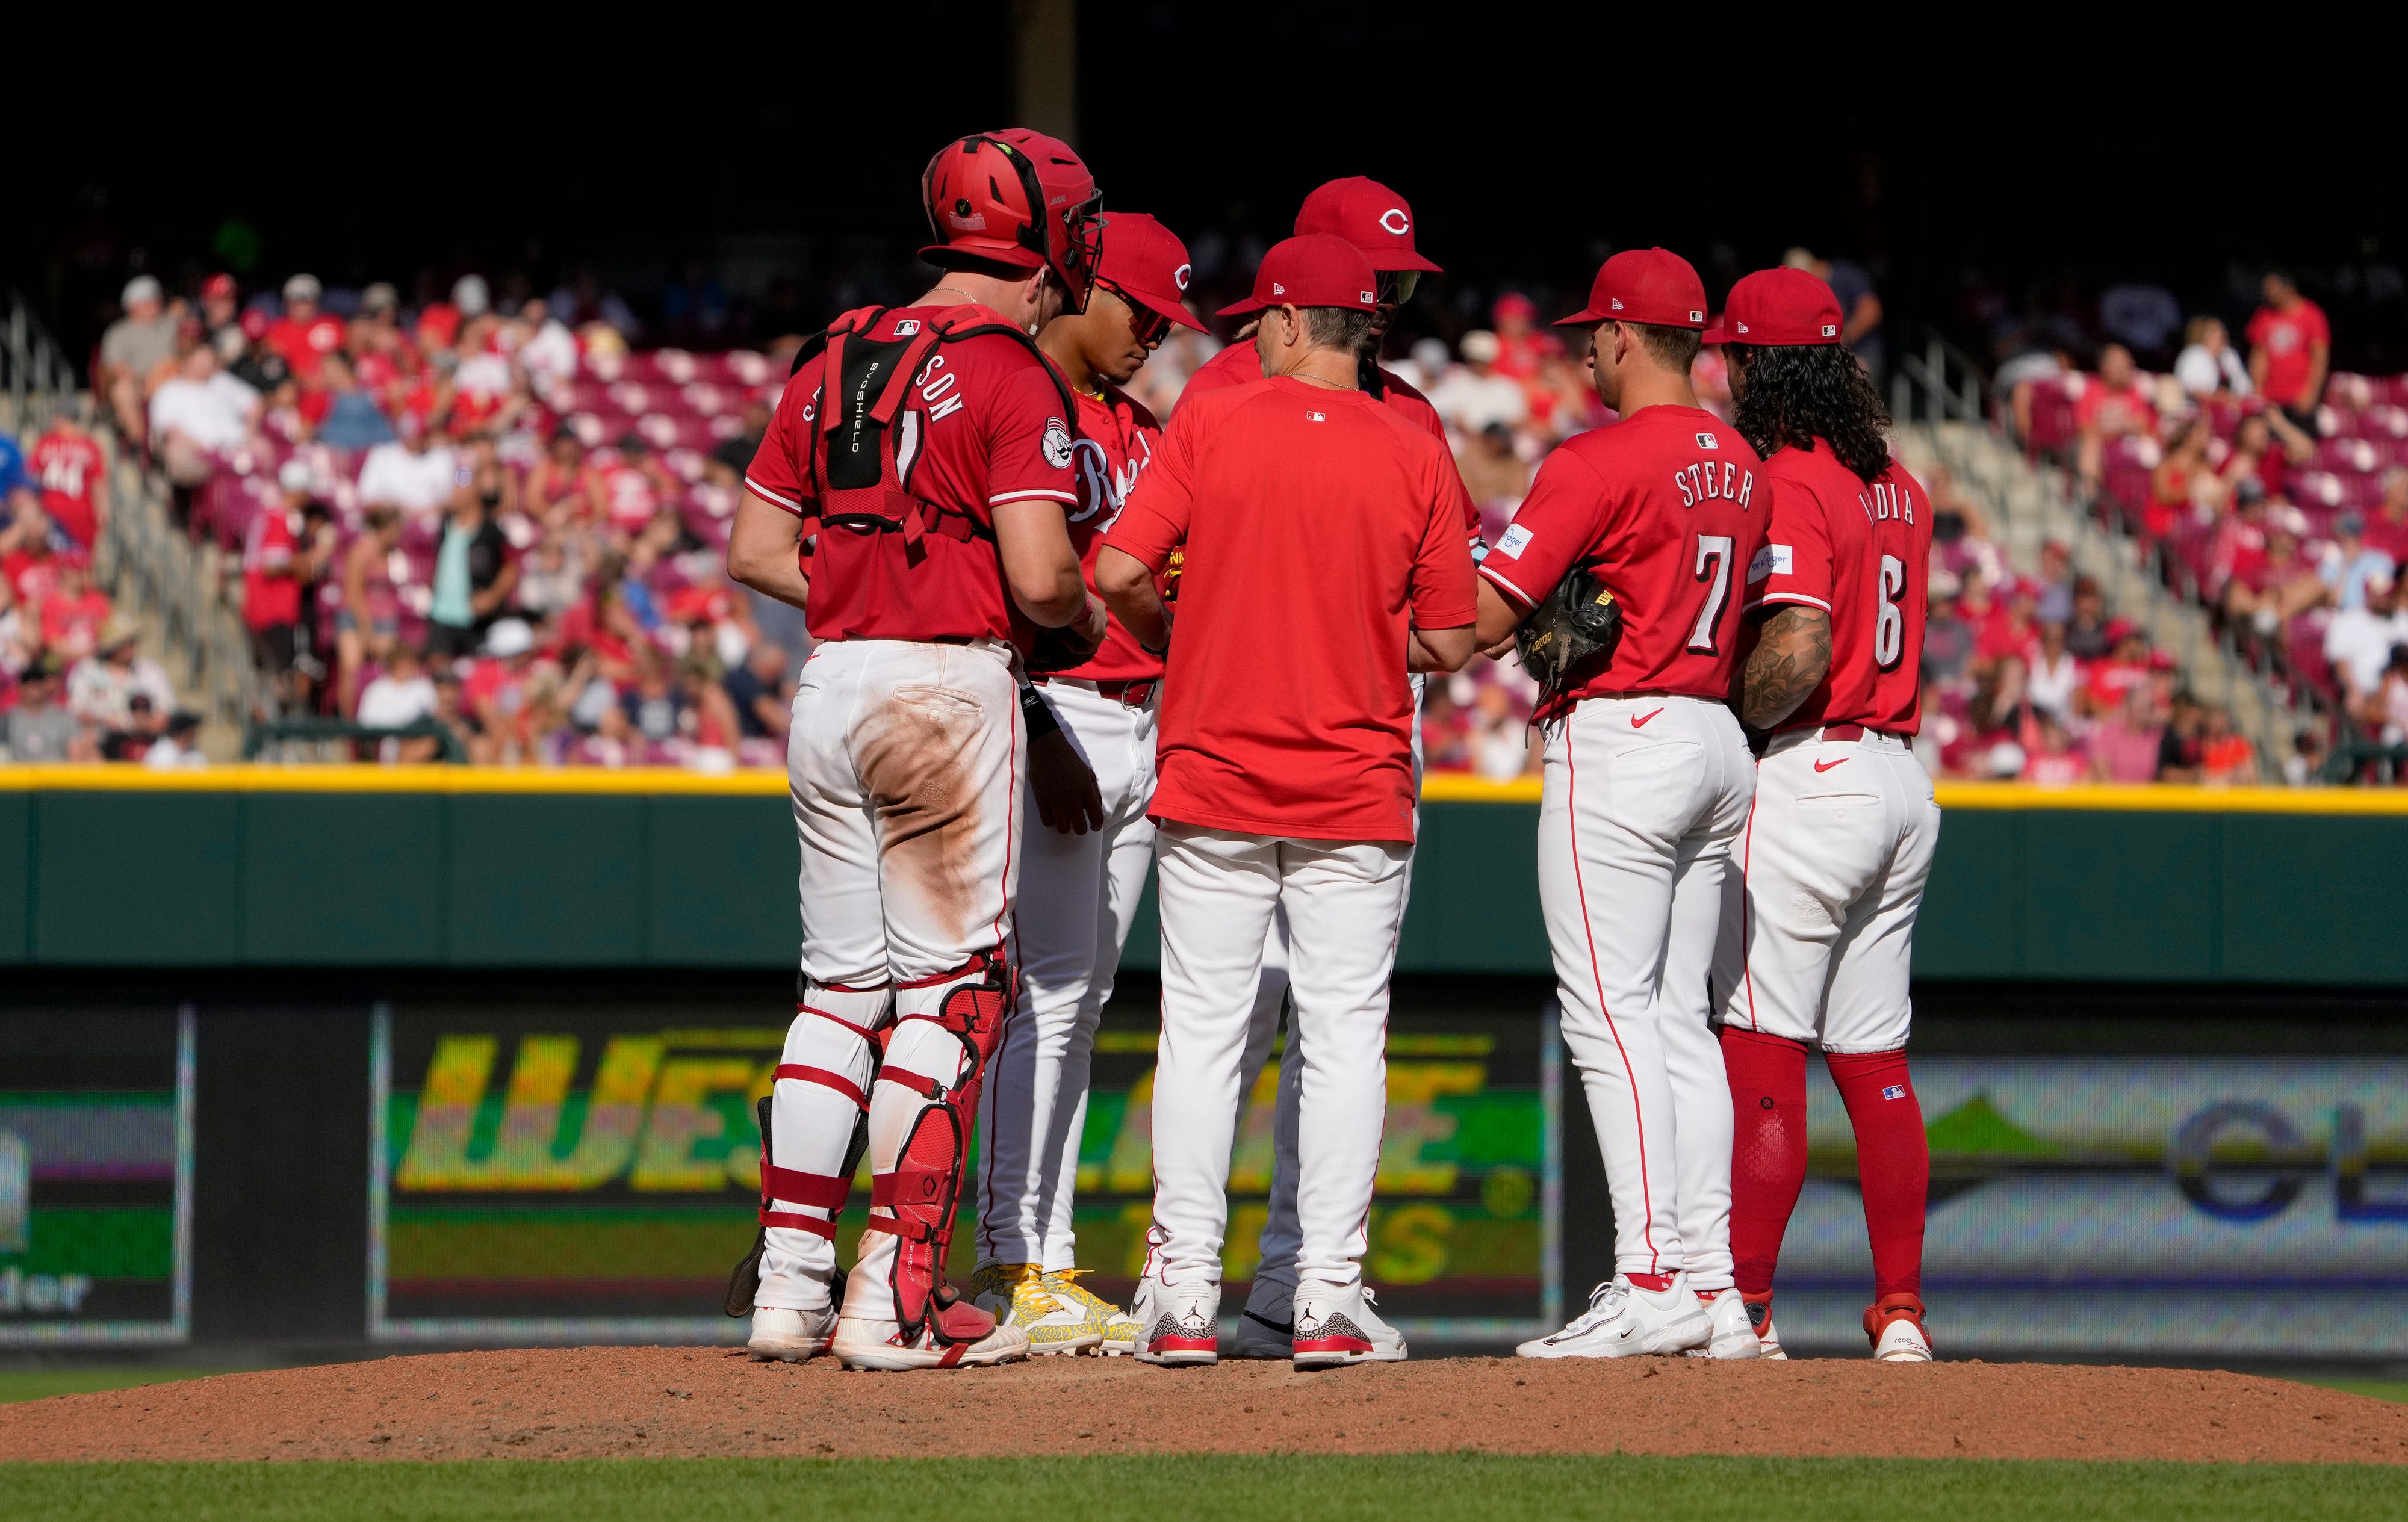 After sweeping the Yankees, the Reds take a big step back and get swept by the Tigers